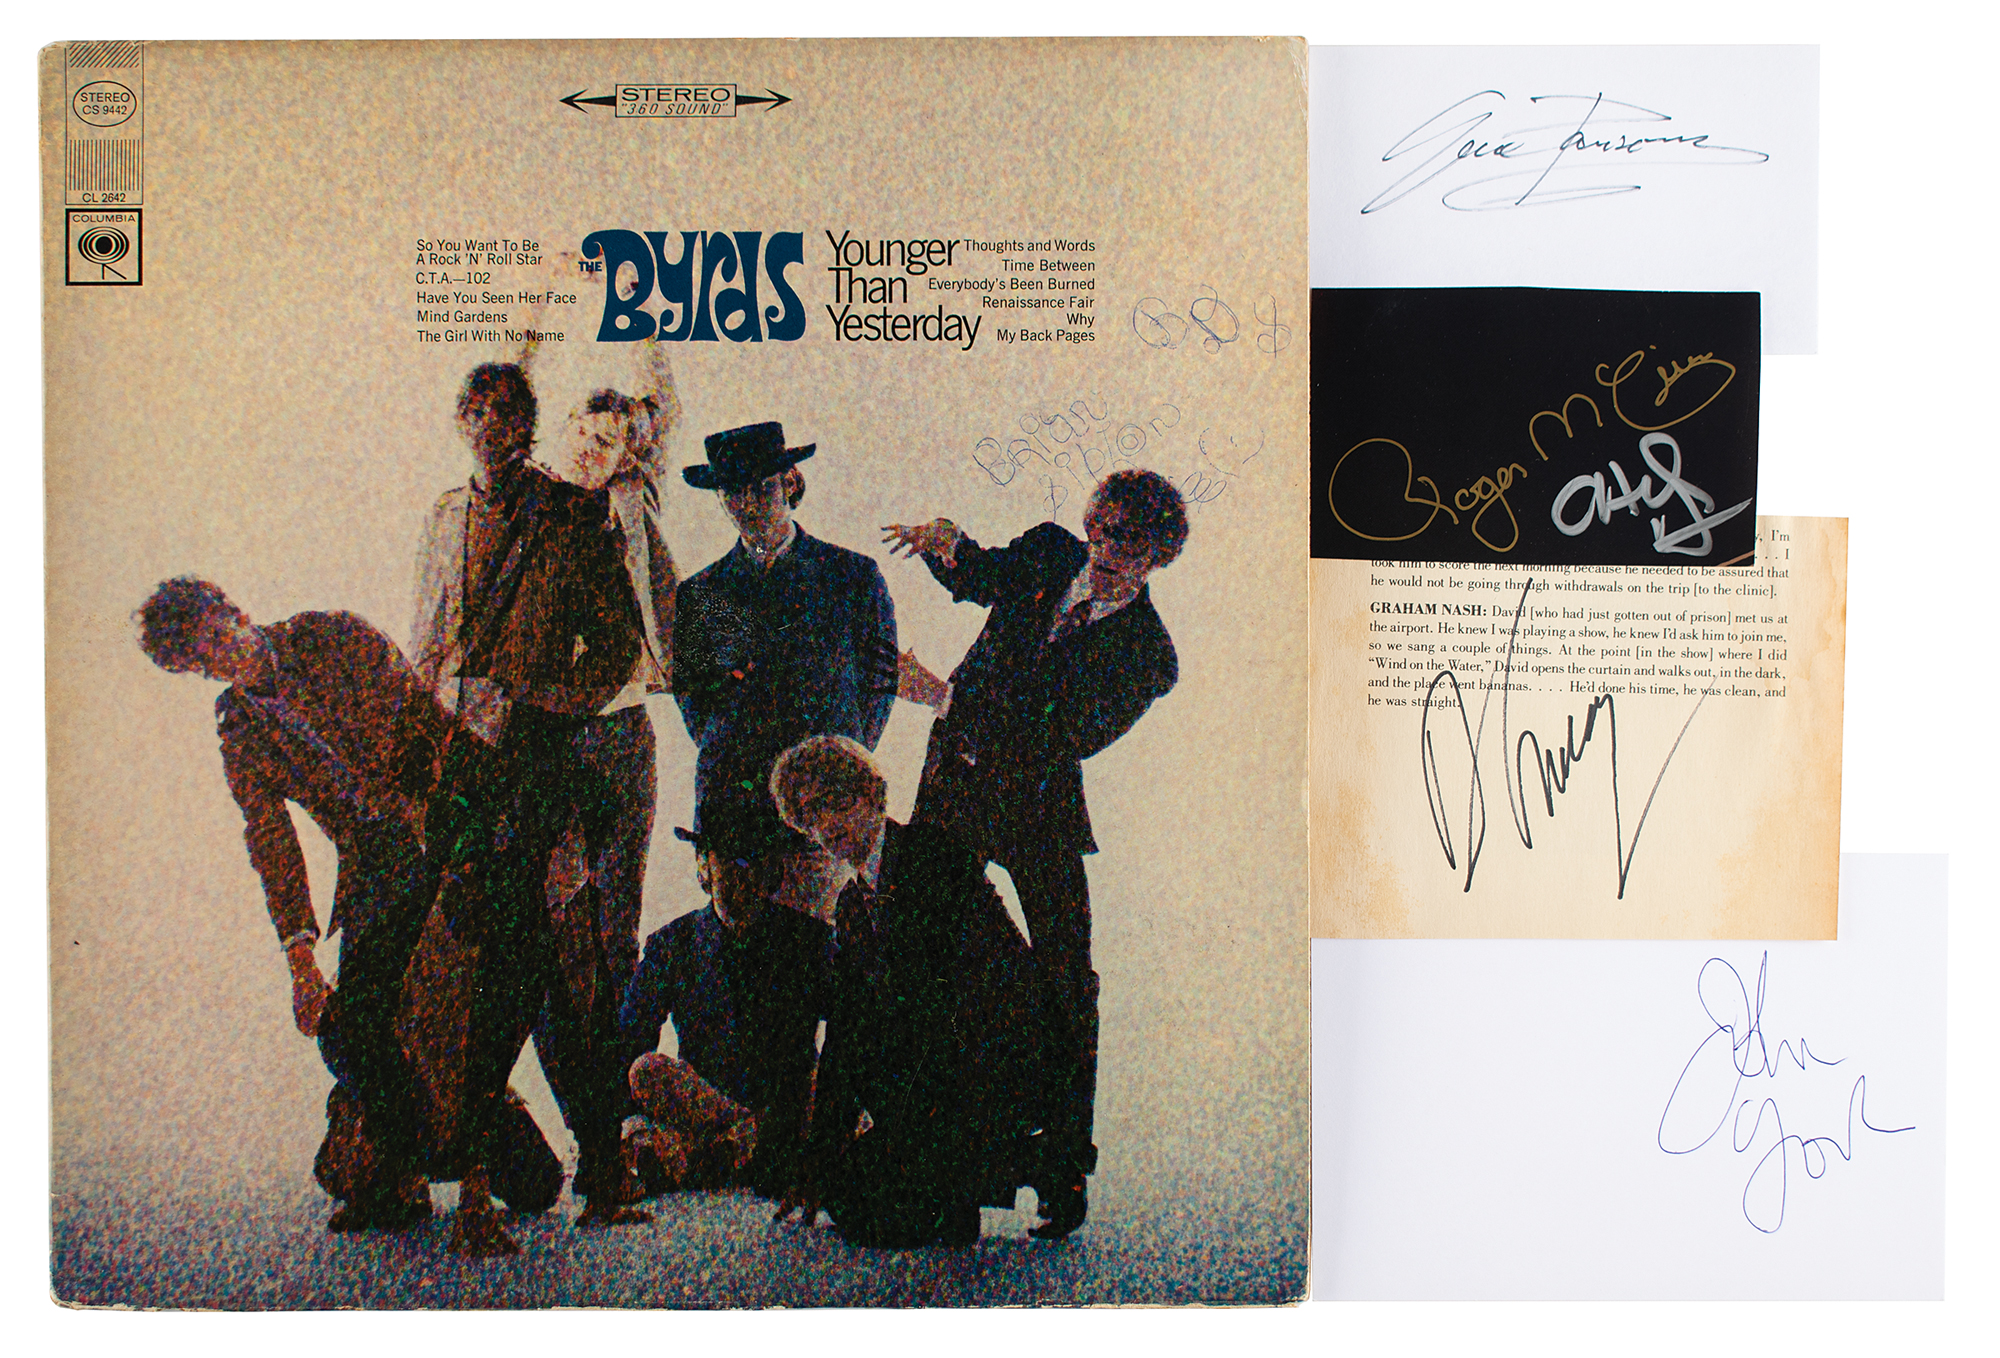 Lot #657 The Byrds Signatures